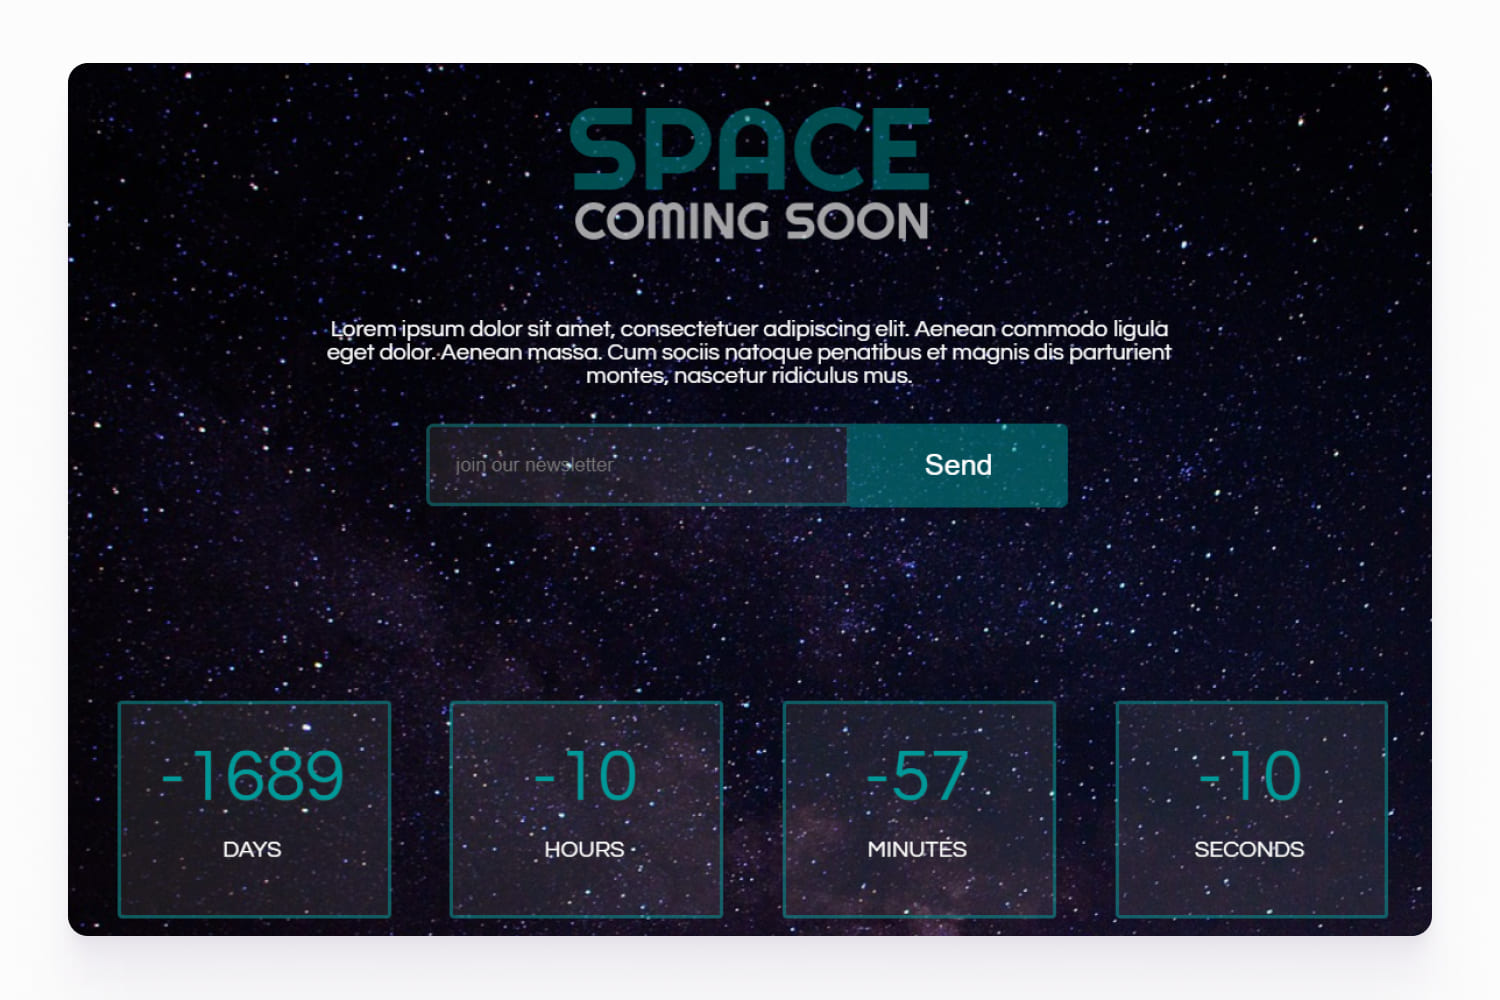 Screenshots of a website page with a starry background, a subscription form and a countdown to launch.